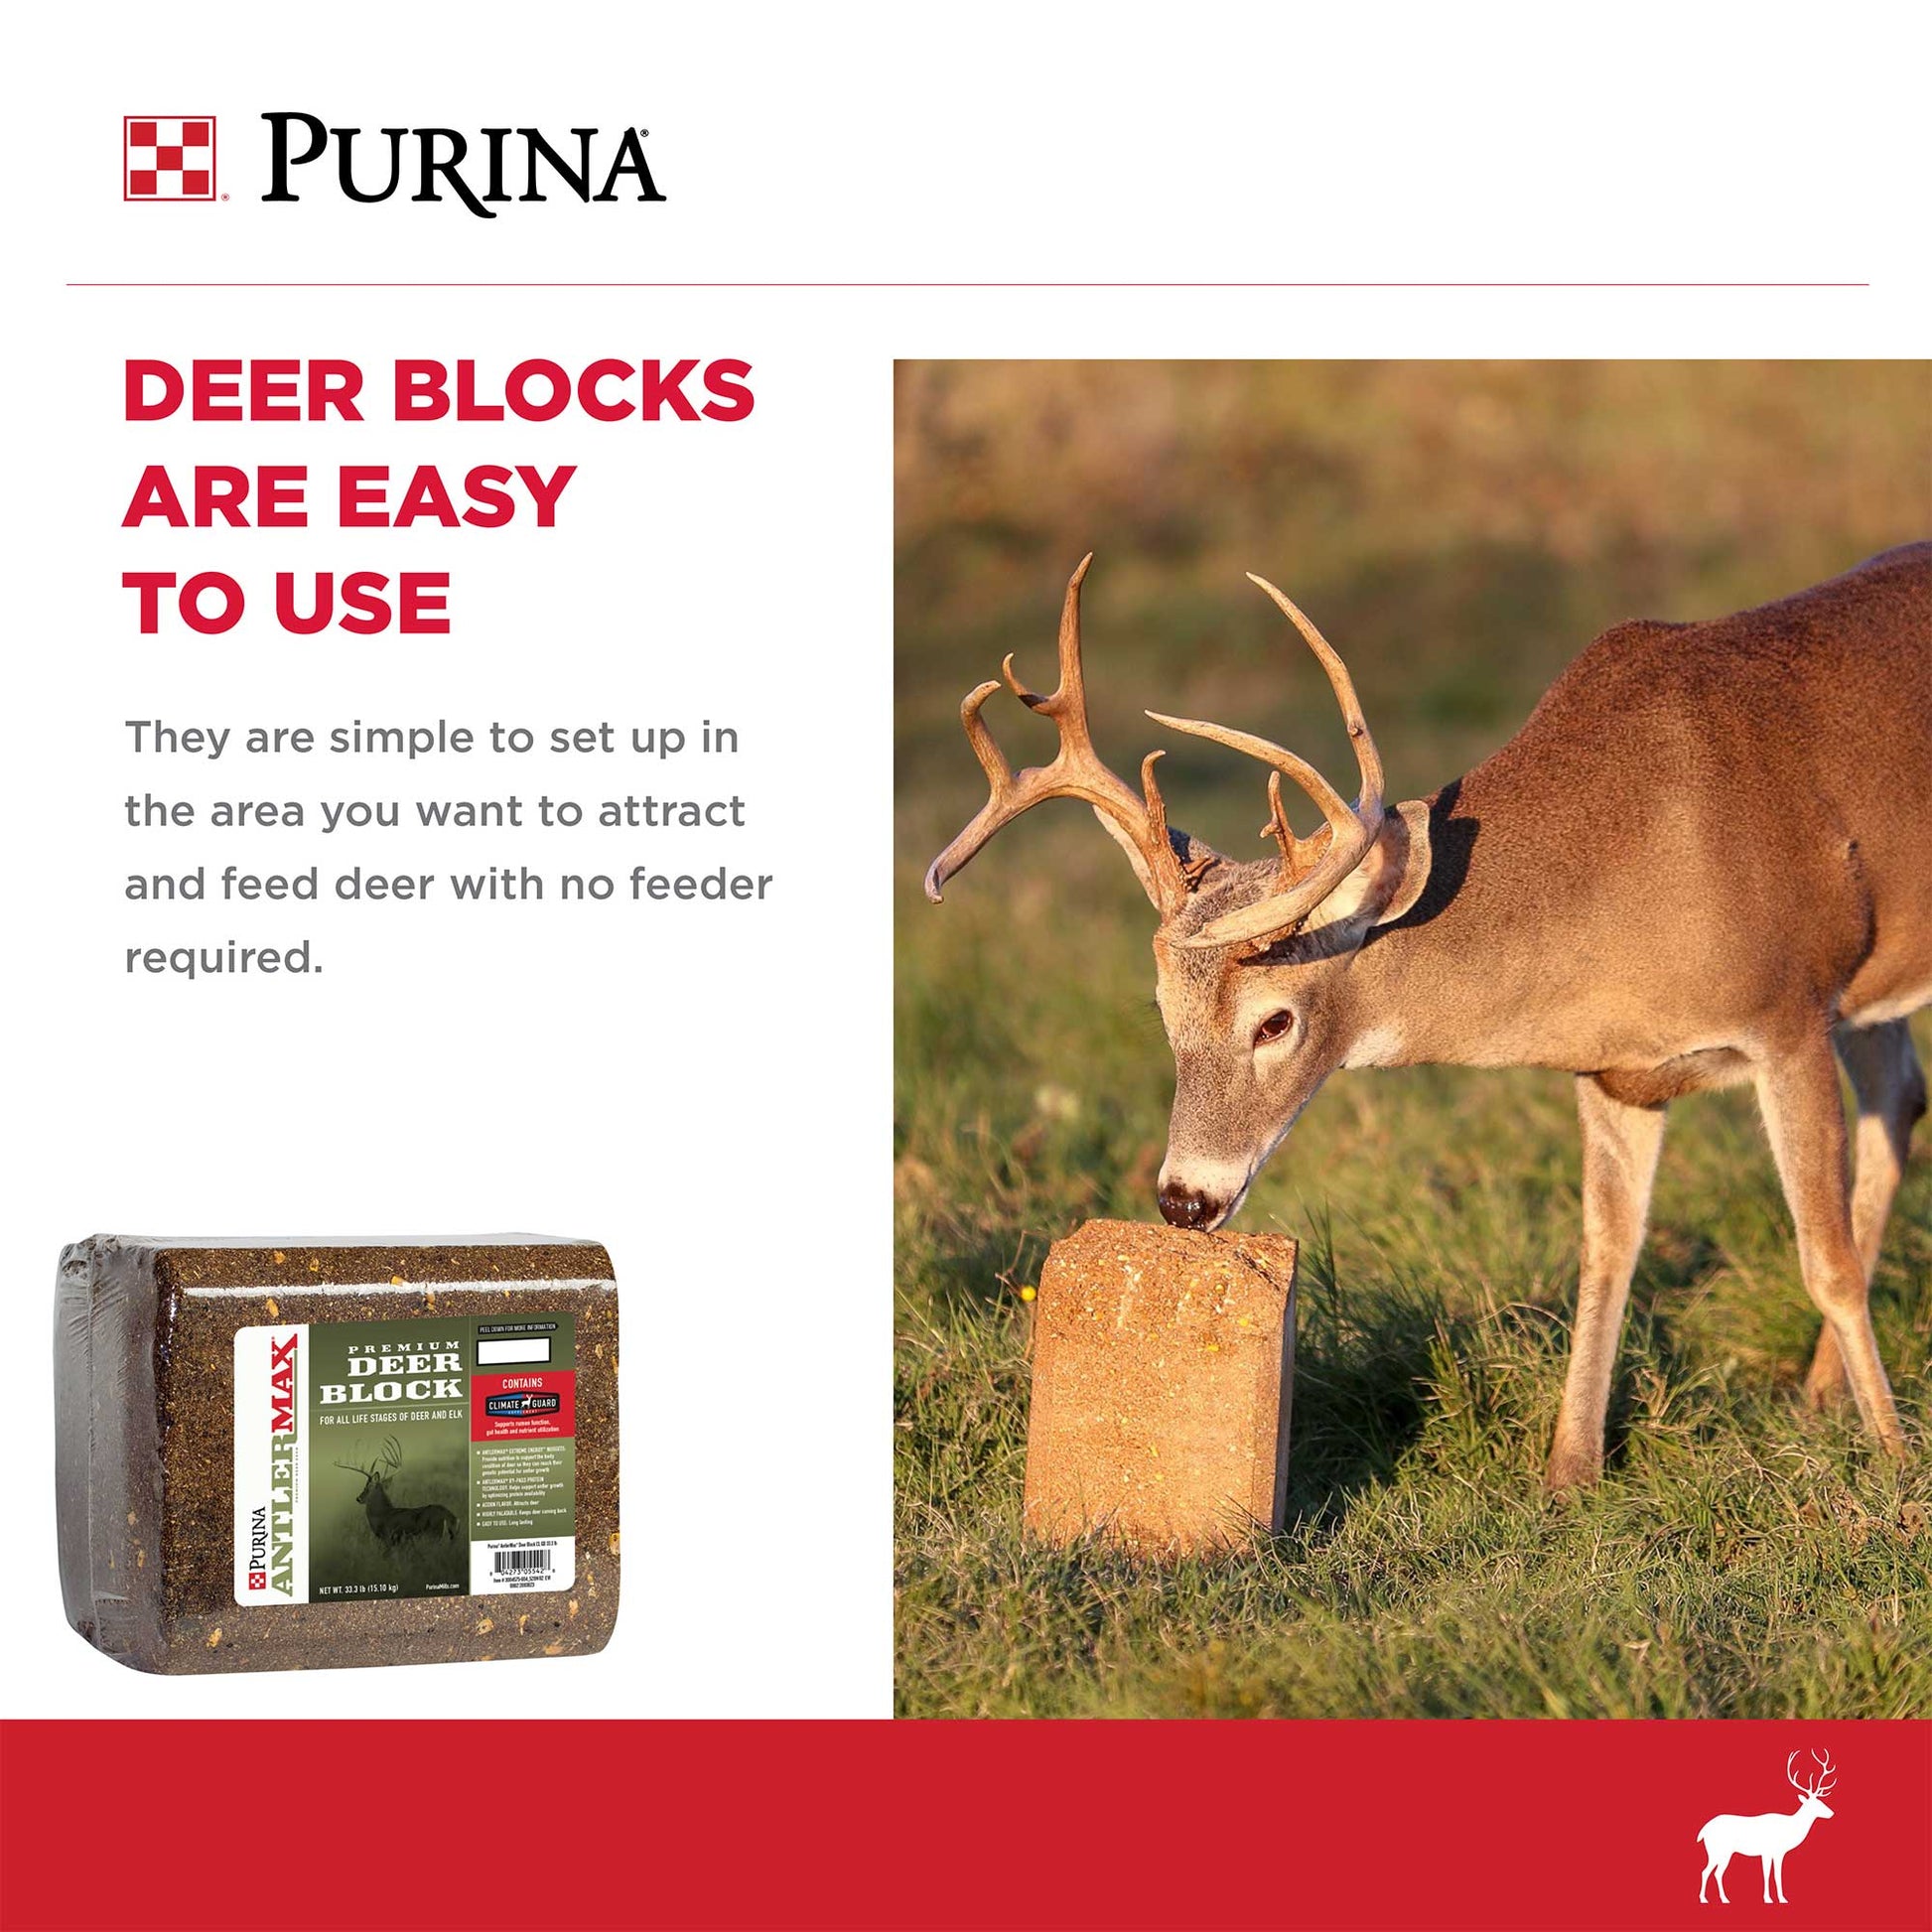 A deer eating the Purina block in a grass field